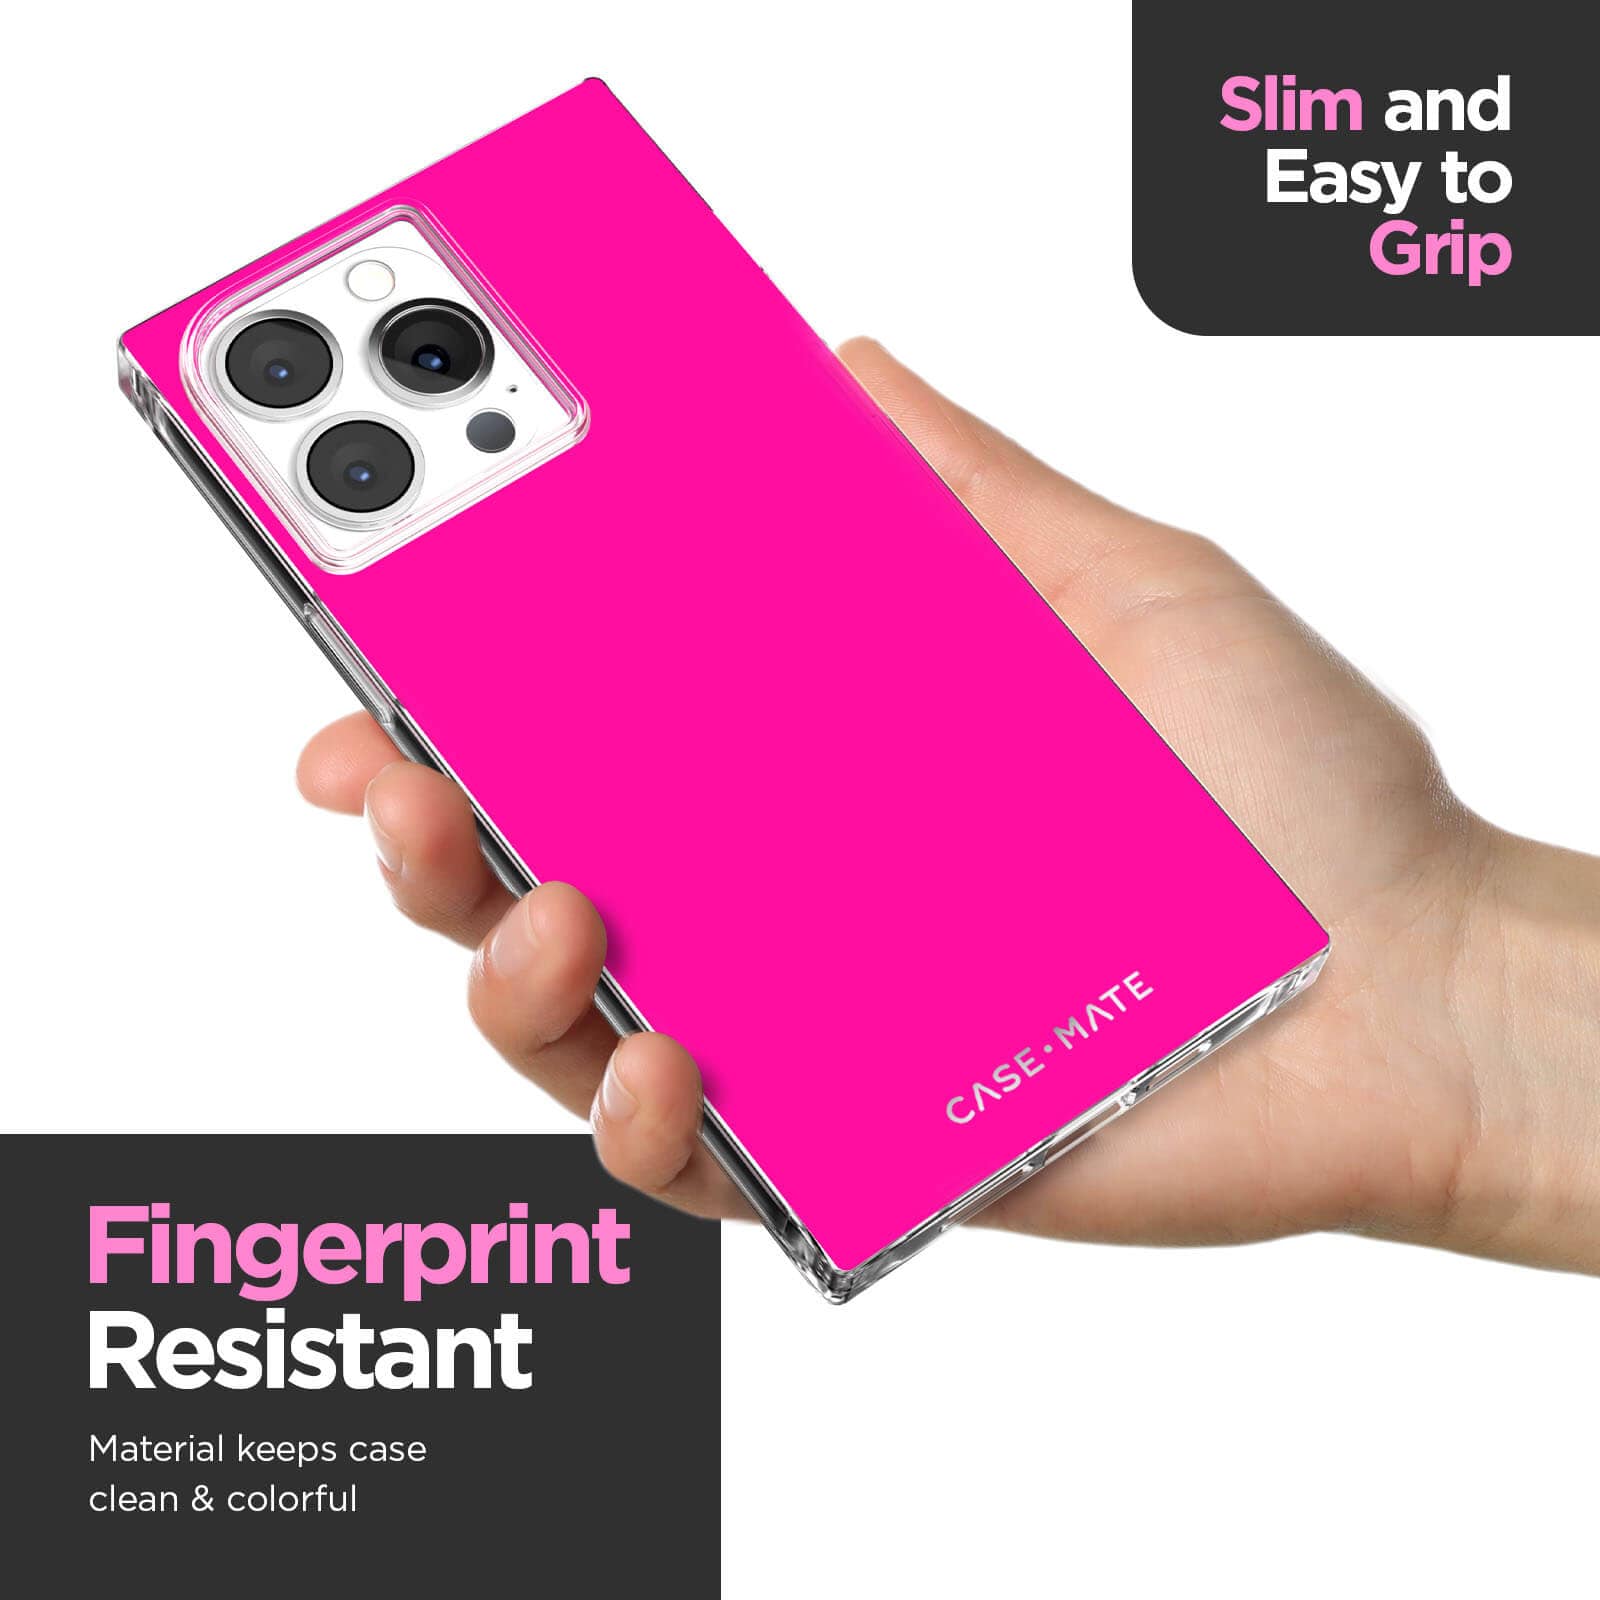 Slim and easy to grip. Fingerprint resistant material keeps case clean and colorful. color::Hot Pink